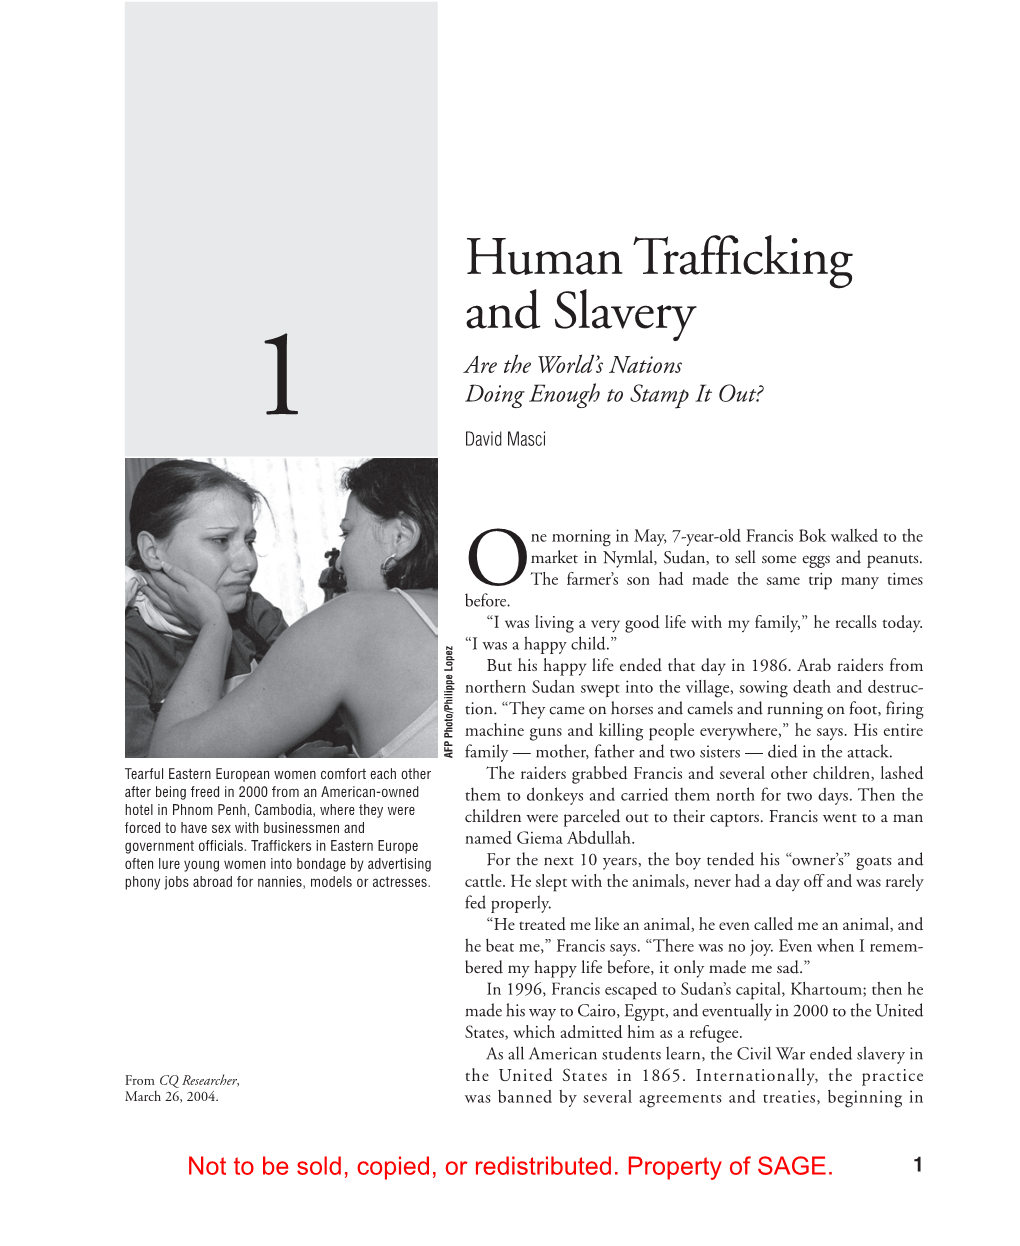 Human Trafficking and Slavery Are the World’S Nations 1 Doing Enough to Stamp It Out? David Masci